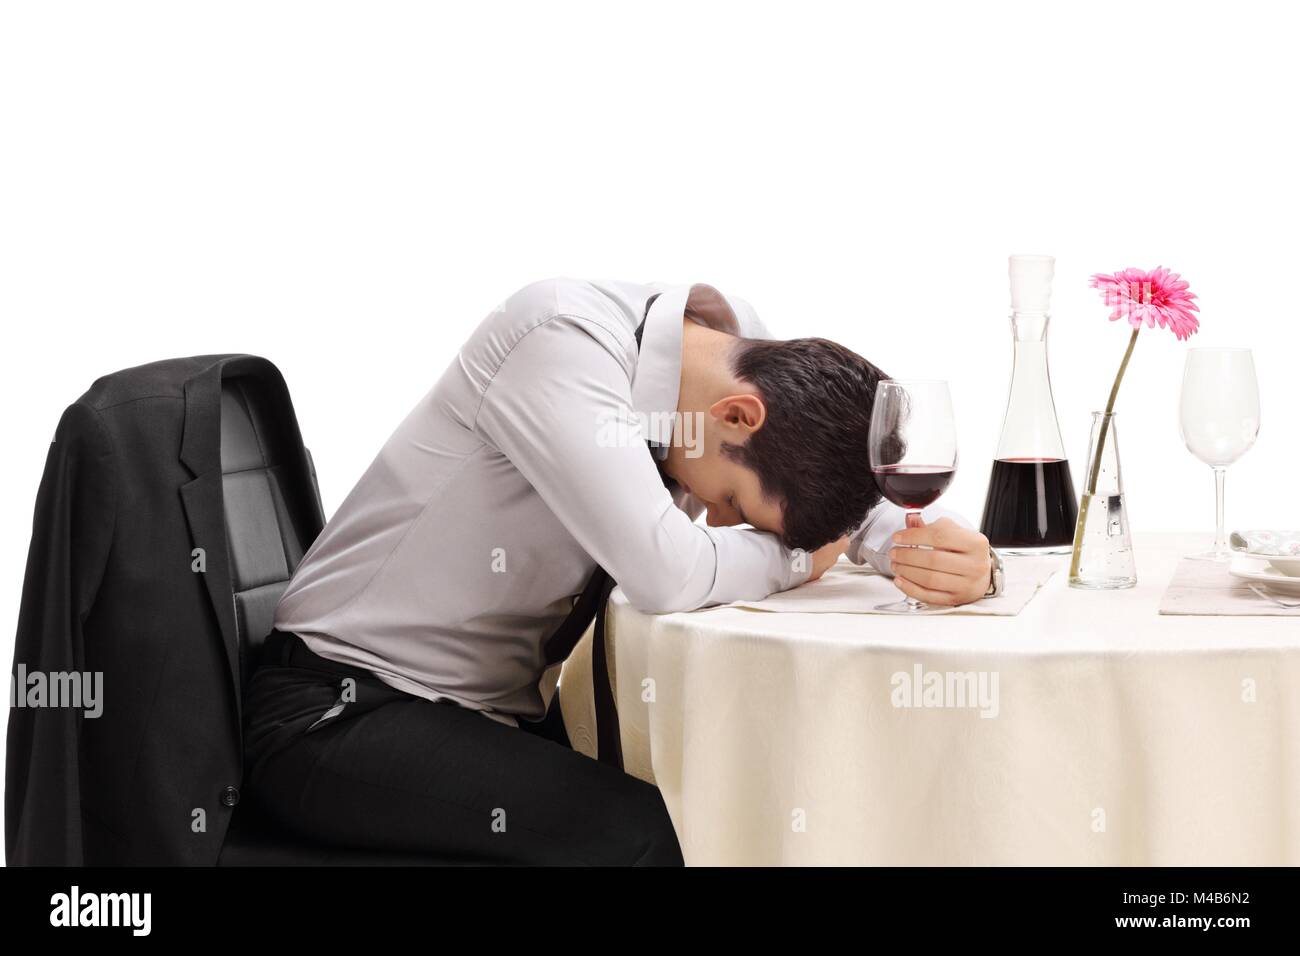 Drunk man sitting at a restaurant table with his head down isolated on white background Stock Photo